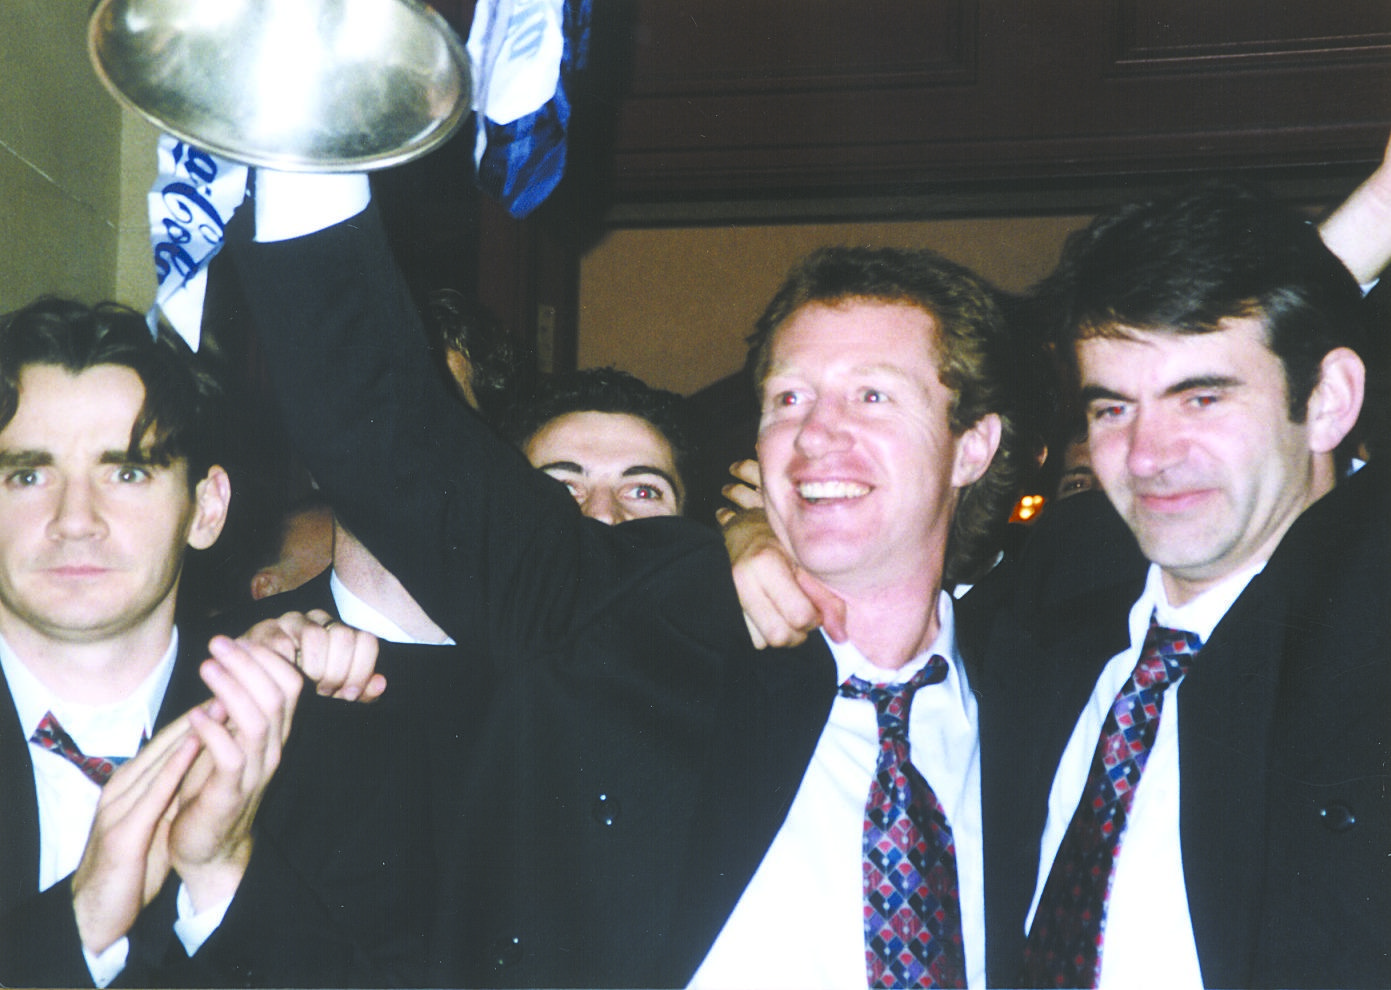 Danny Lennon (far left) looks on as Jimmy Nicholl and Gordon Dalziel parade the Coca Cola League Cup, won by Raith Rovers in 1994.